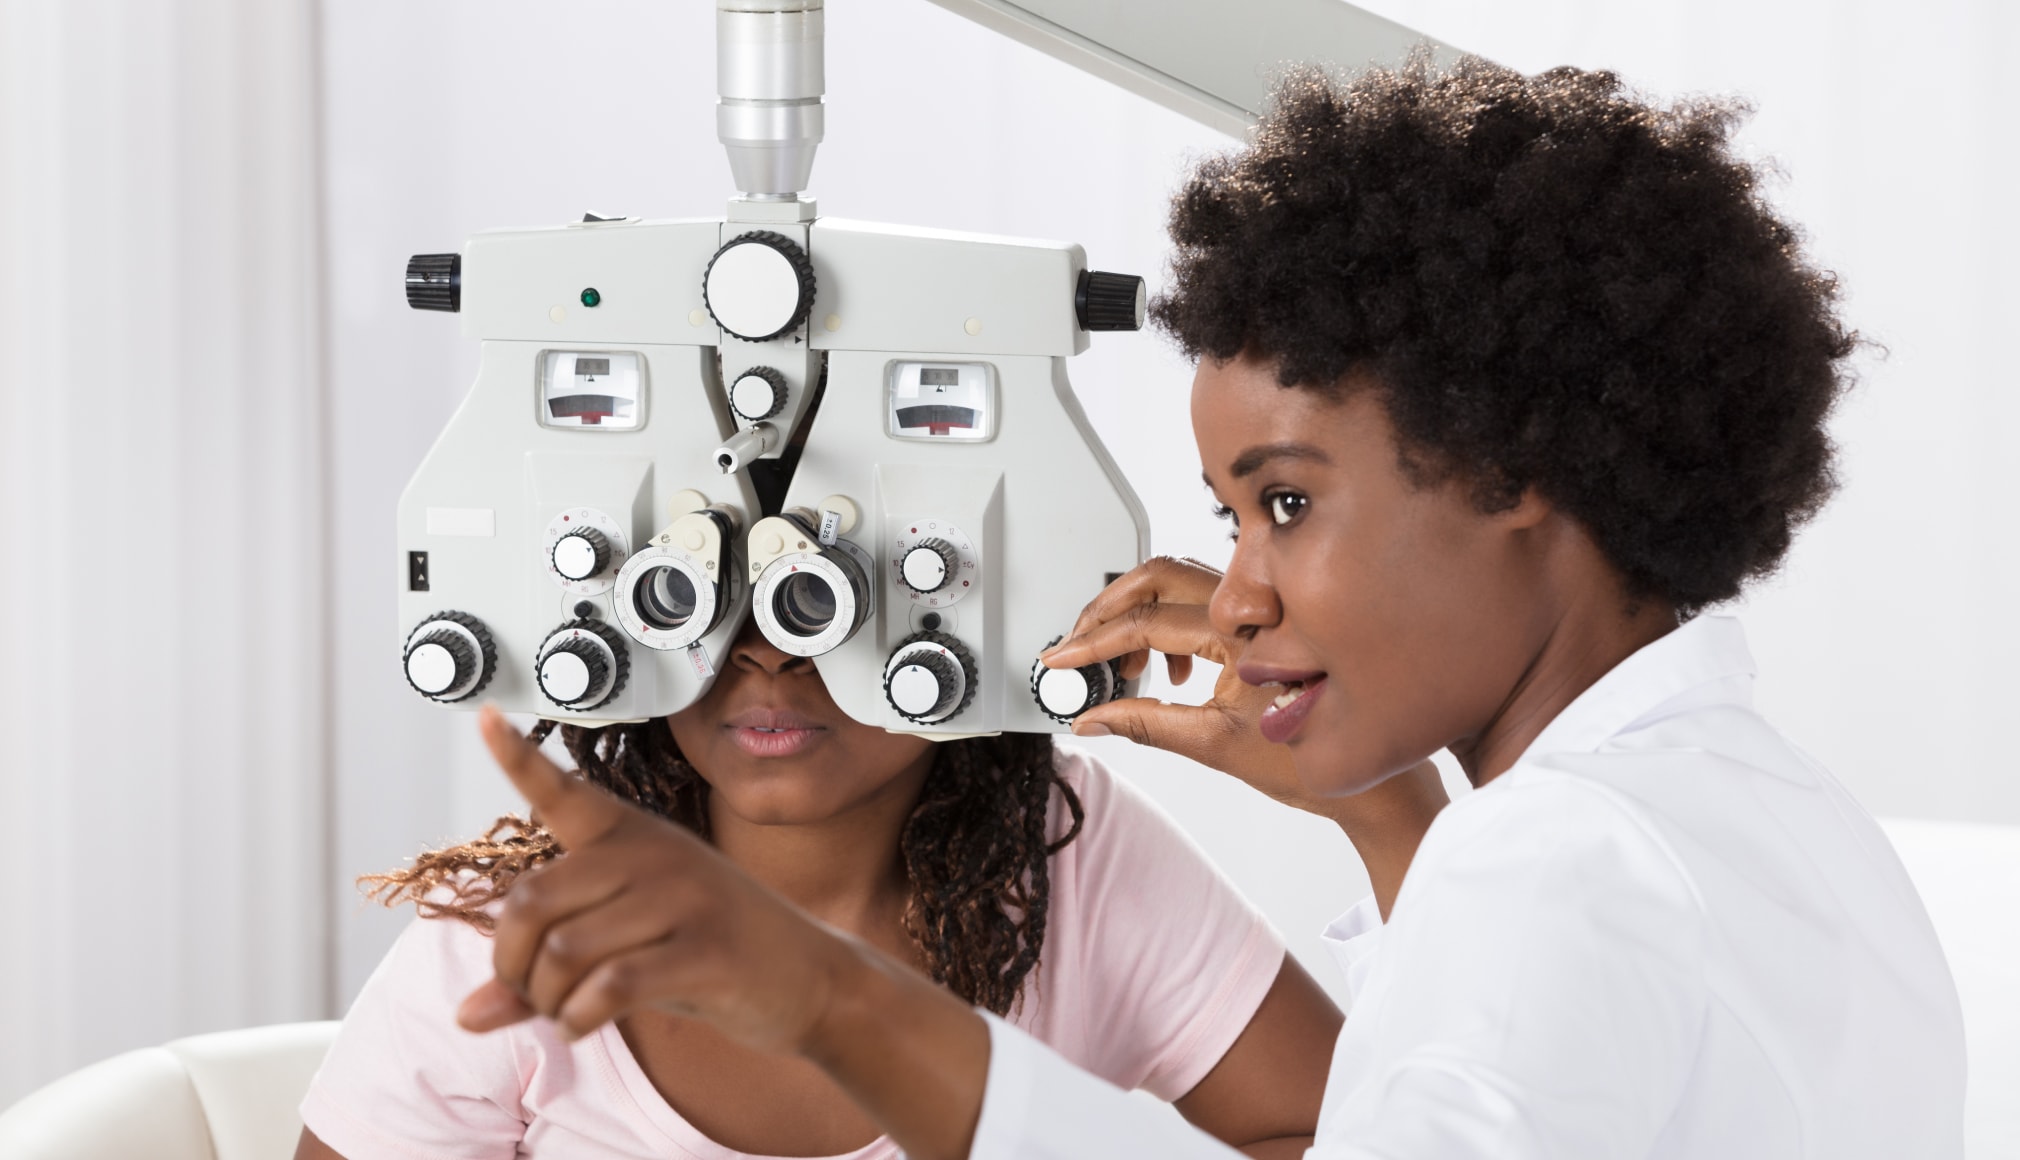 What vision problems does LASIK treat?